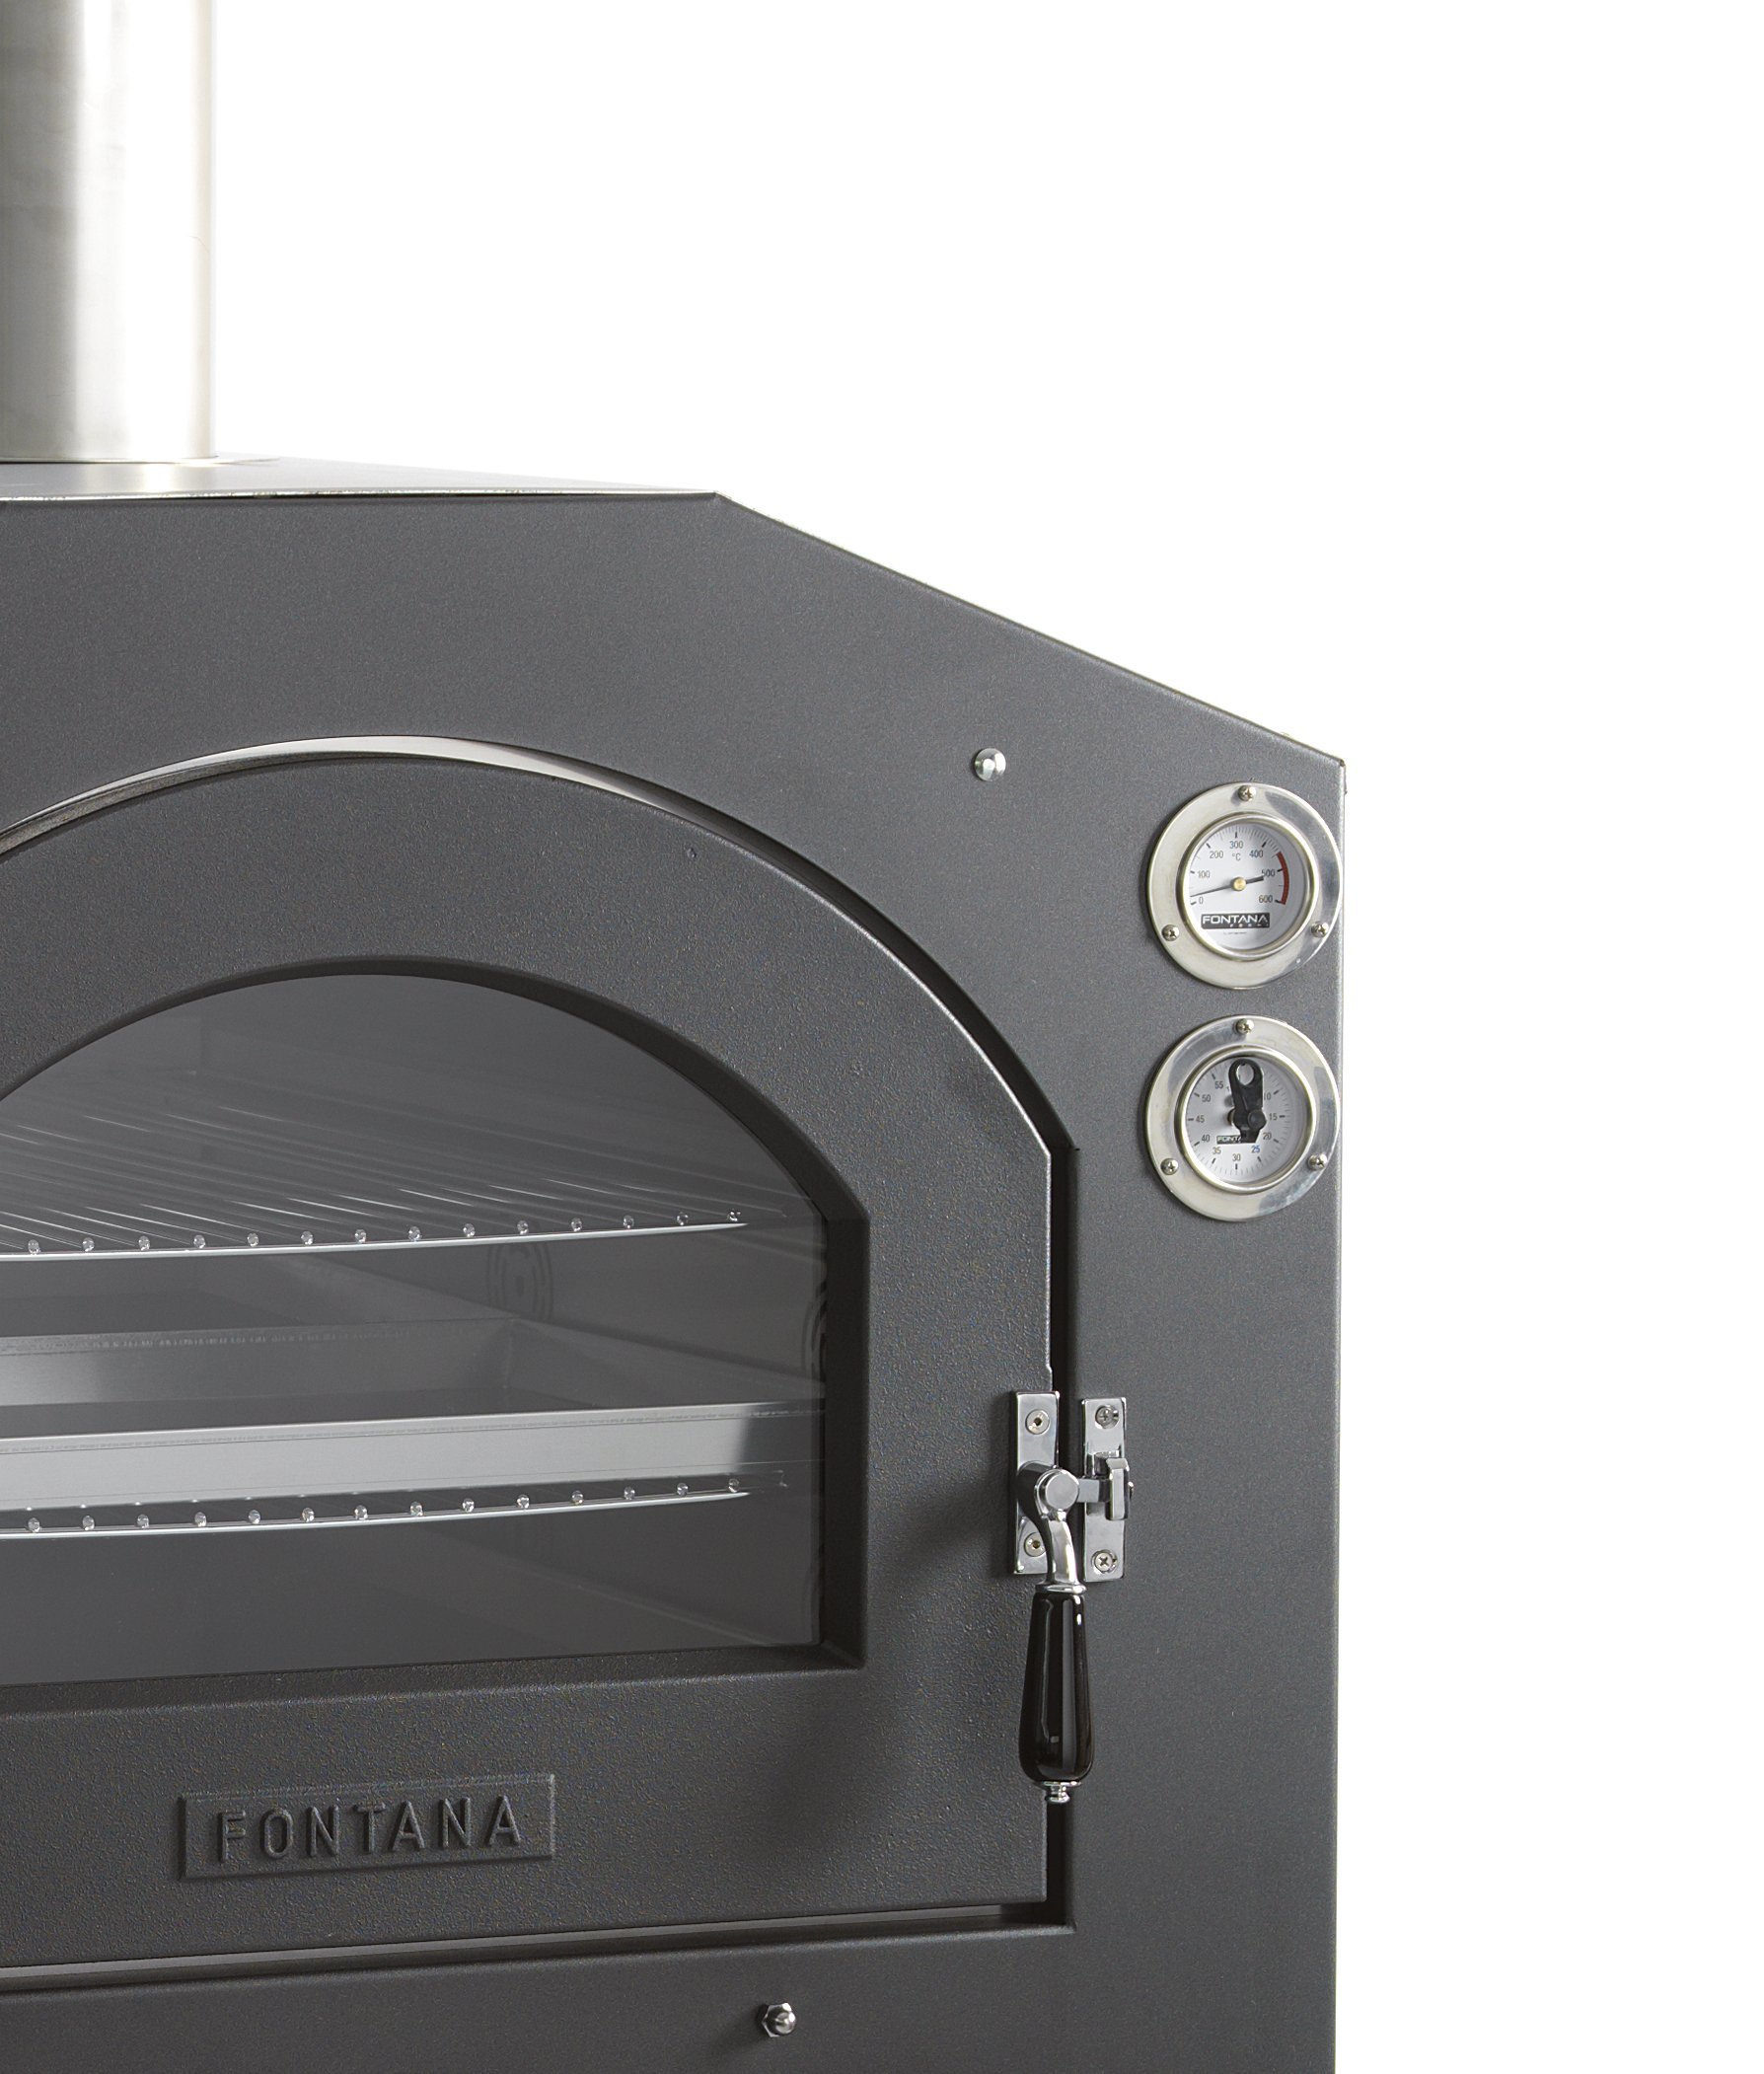 Fontana spare part: timer for baking houses and pizza ovens